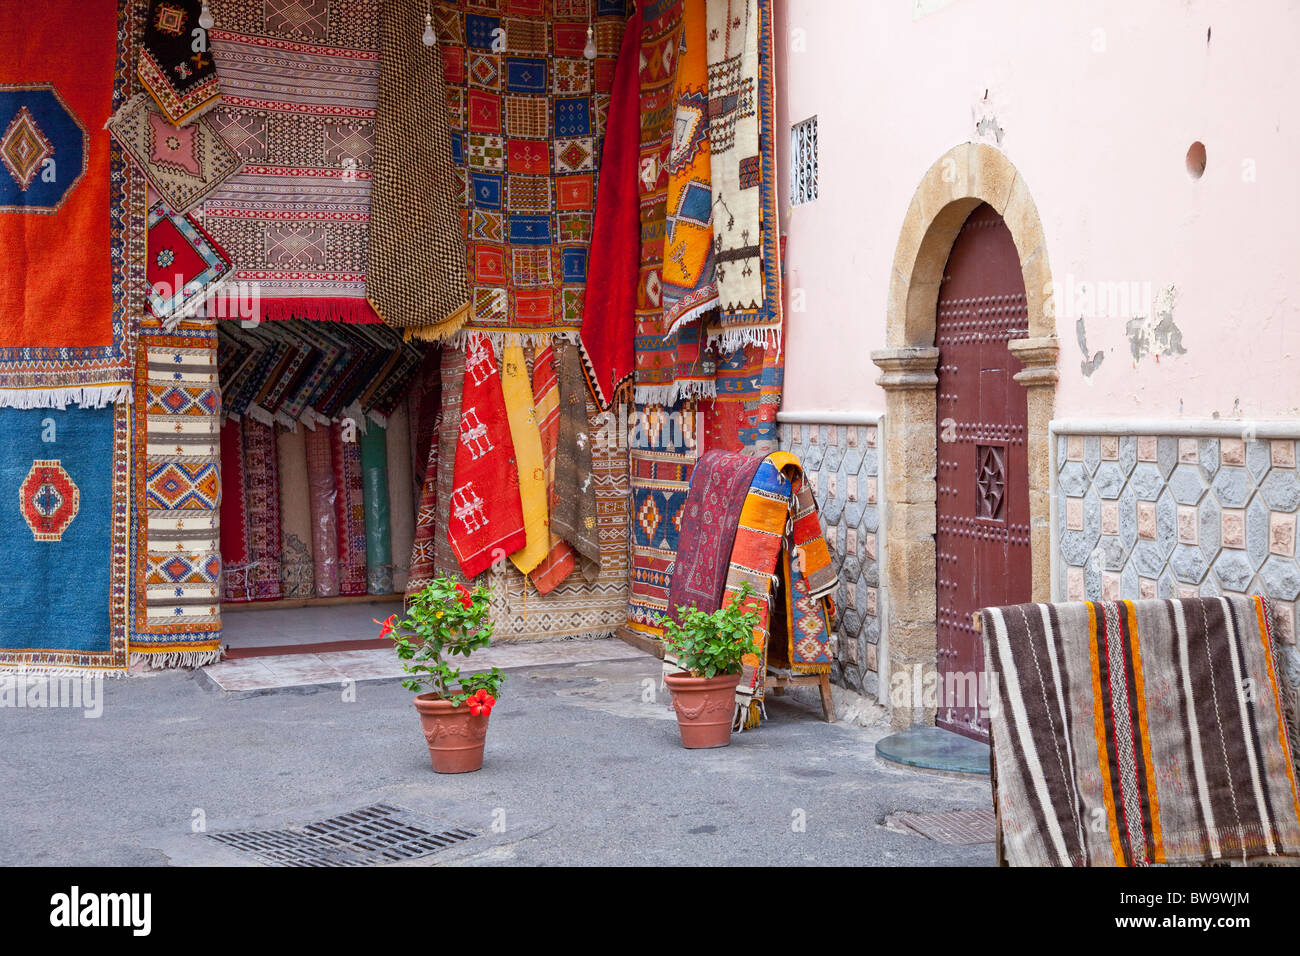 Shops in the souq market in the Habous Quarter, Casablanca, Morocco. Stock Photo